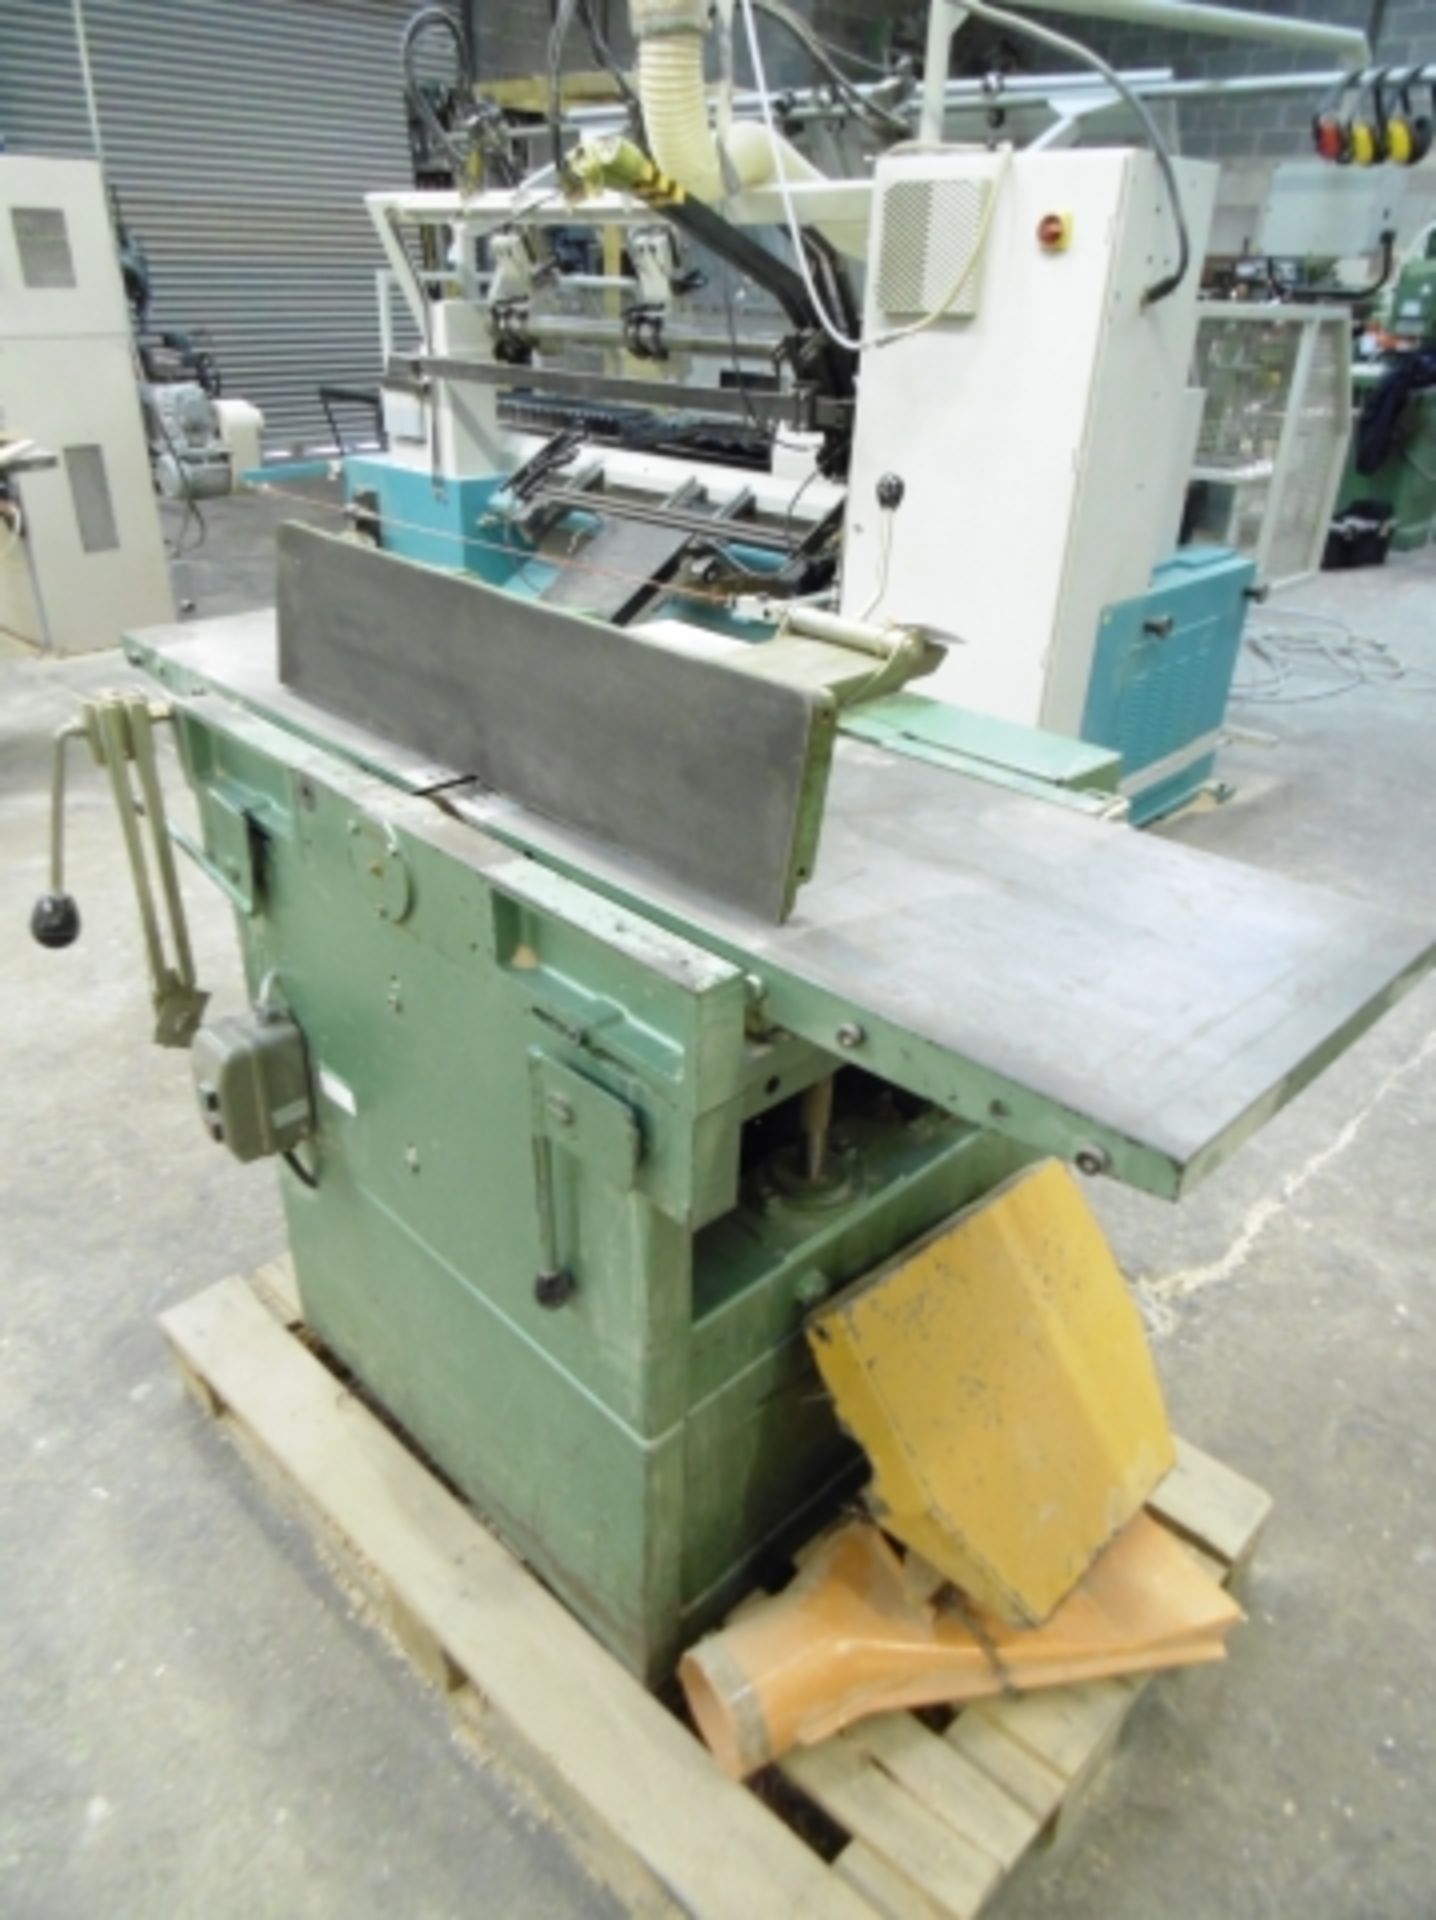 * BGU Type KAD410 Planer; bed width 410mm; 3 phase; serial number 88 0 695. Please note there is